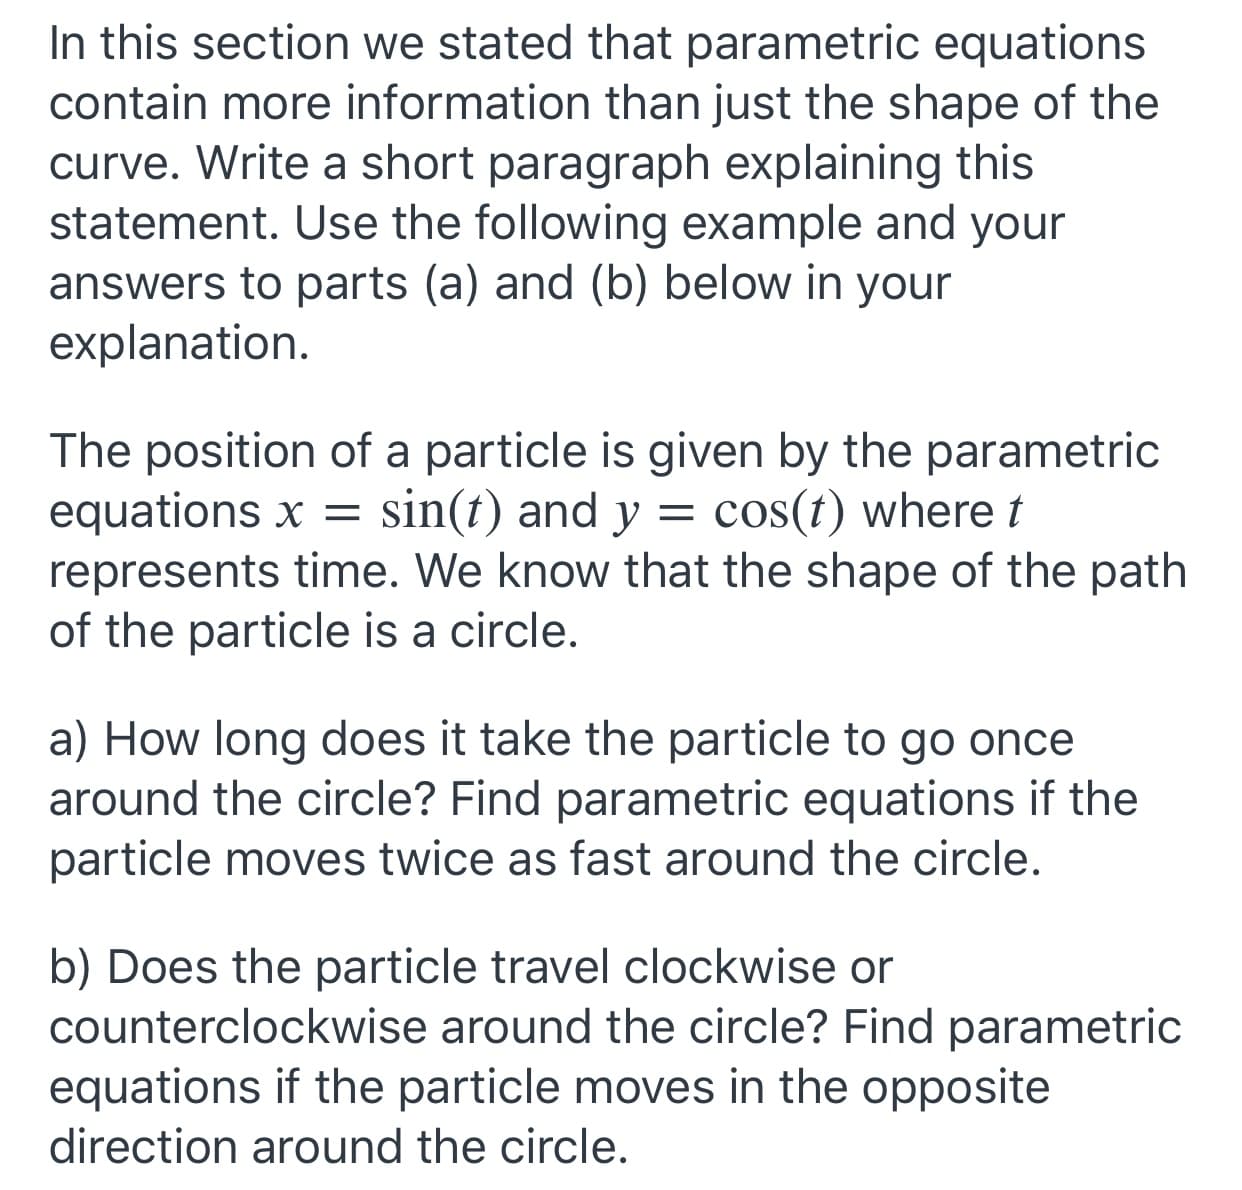 In this section we stated that parametric equations
contain more information than just the shape of the
curve. Write a short paragraph explaining this
statement. Use the following example and your
answers to parts (a) and (b) below in your
explanation.
The position of a particle is given by the parametric
equations x = sin(t) and y
represents time. We know that the shape of the path
of the particle is a circle.
cos(t) where t
a) How long does it take the particle to go once
around the circle? Find parametric equations if the
particle moves twice as fast around the circle.
b) Does the particle travel clockwise or
counterclockwise around the circle? Find parametric
equations if the particle moves in the opposite
direction around the circle.
